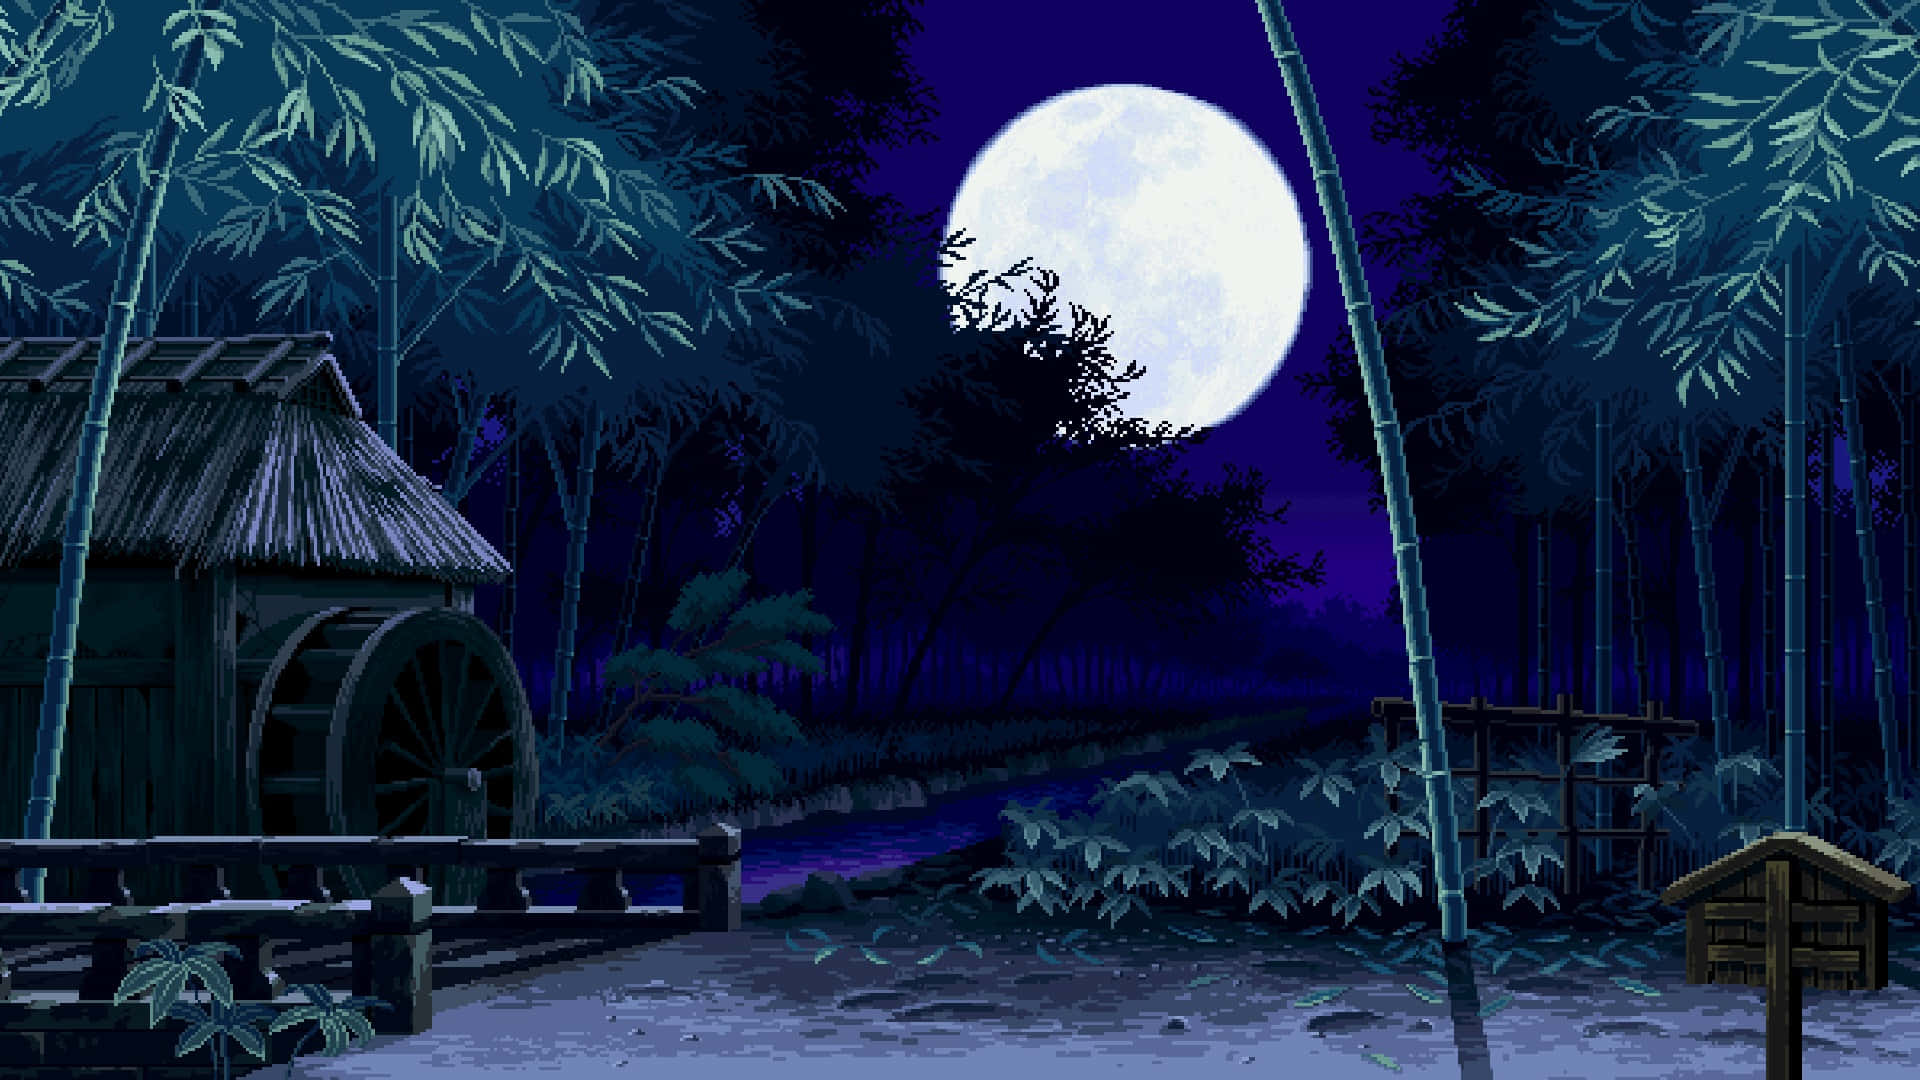 A Scene With A Bamboo House And A Full Moon